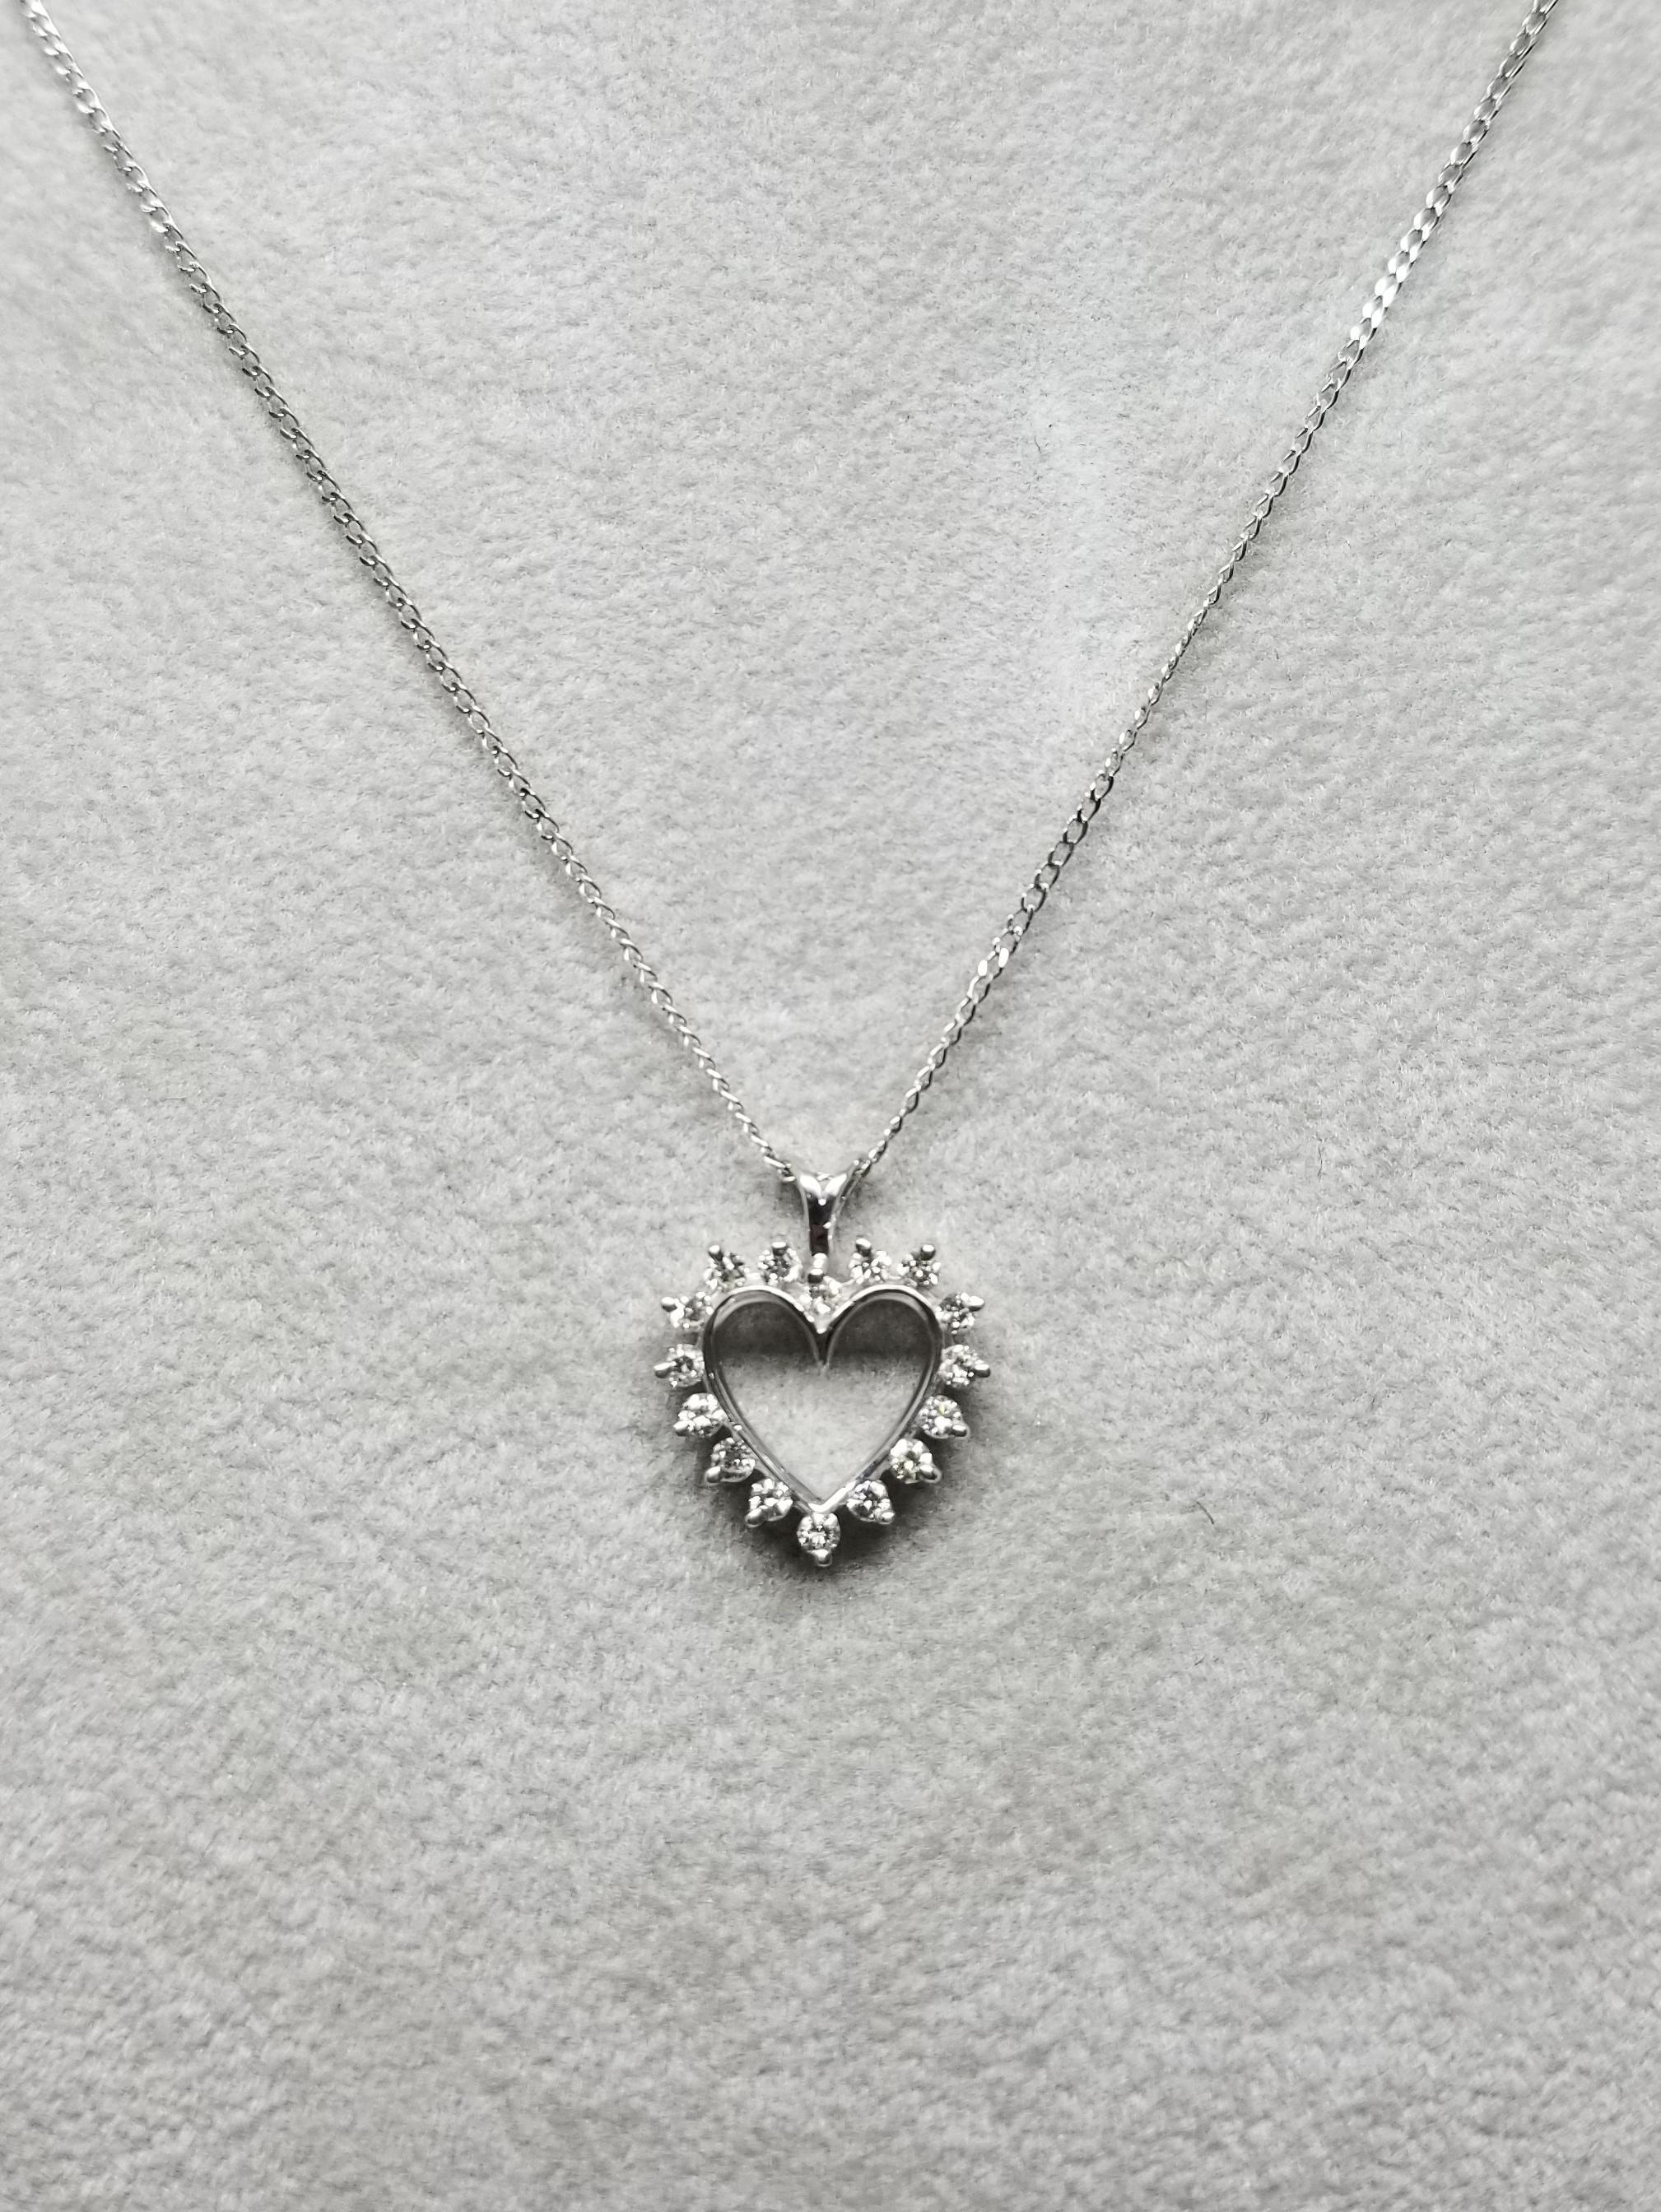 14k white gold diamond heart pendant containing 16 round full cut diamonds of very fine quality weighing .25pts. on a 16 inch chain.